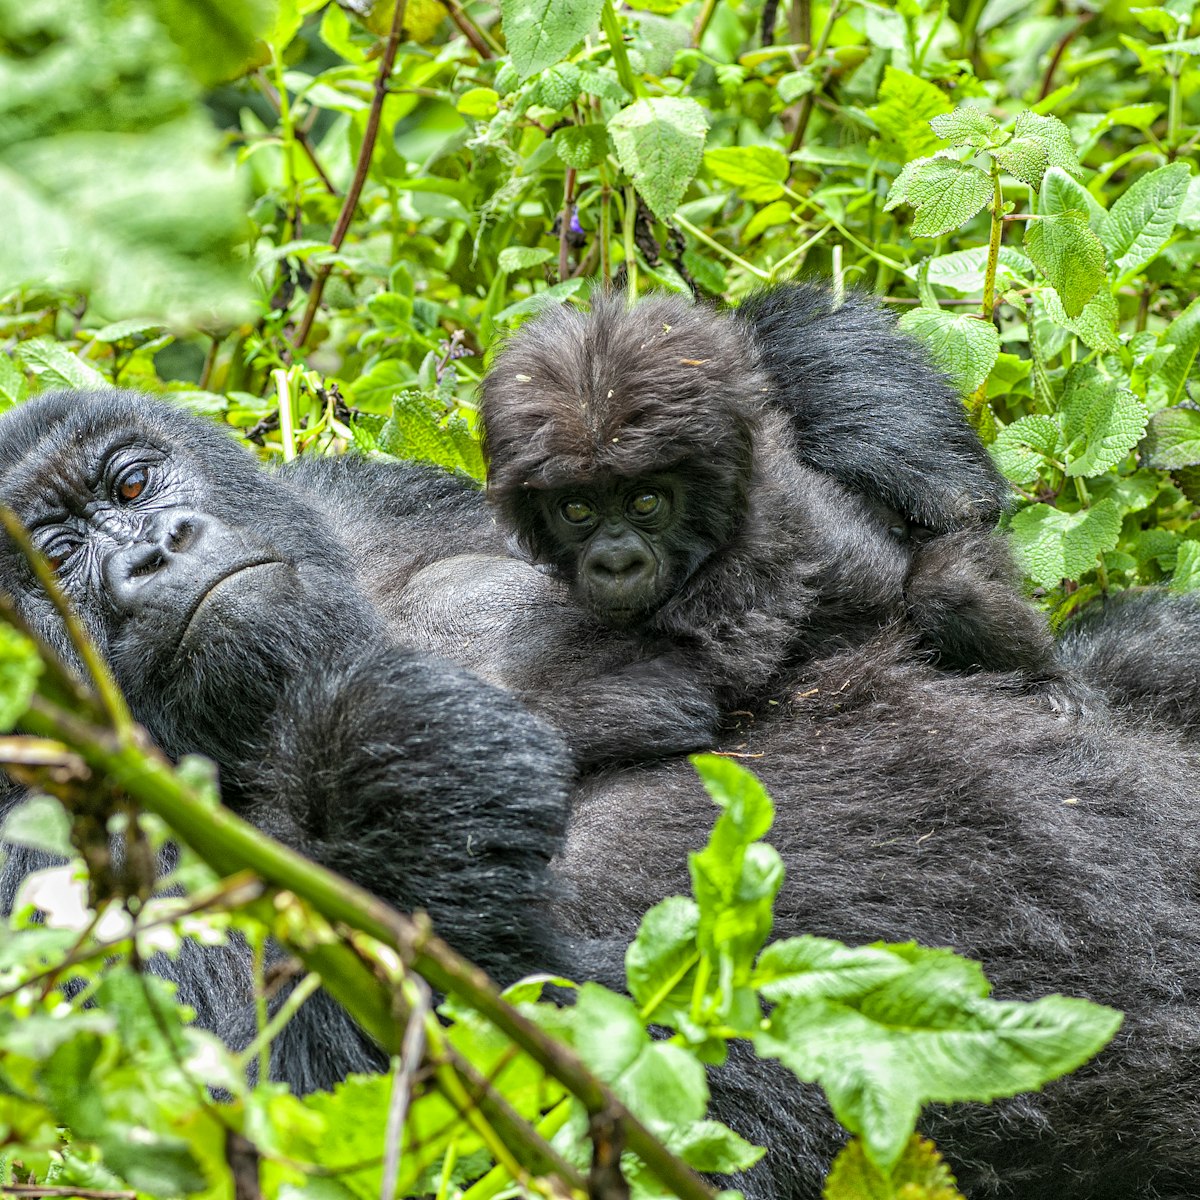 A female mountain gorilla with her young baby in Volcanoes National Park in the Virunga Mountains.
